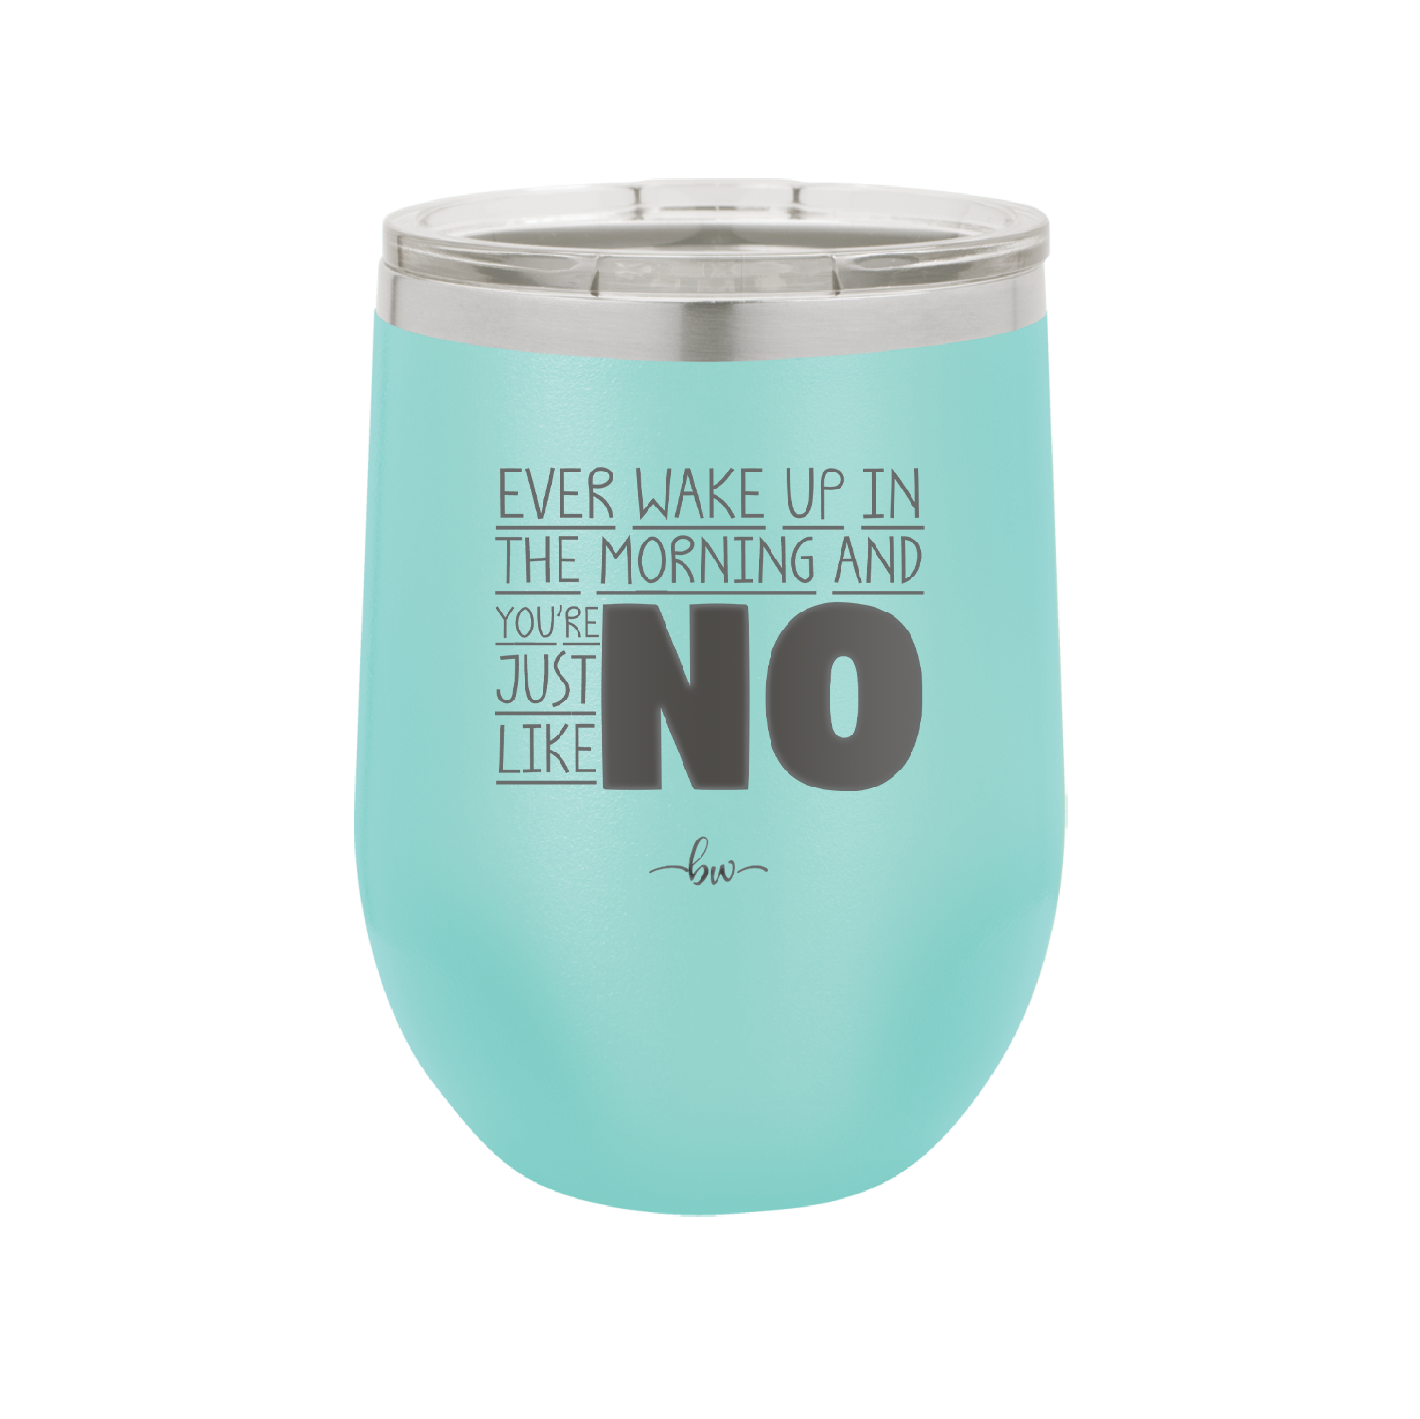 Ever Wake Up in the Morning and You're Just Like No - Laser Engraved Stainless Steel Drinkware - 1209 -